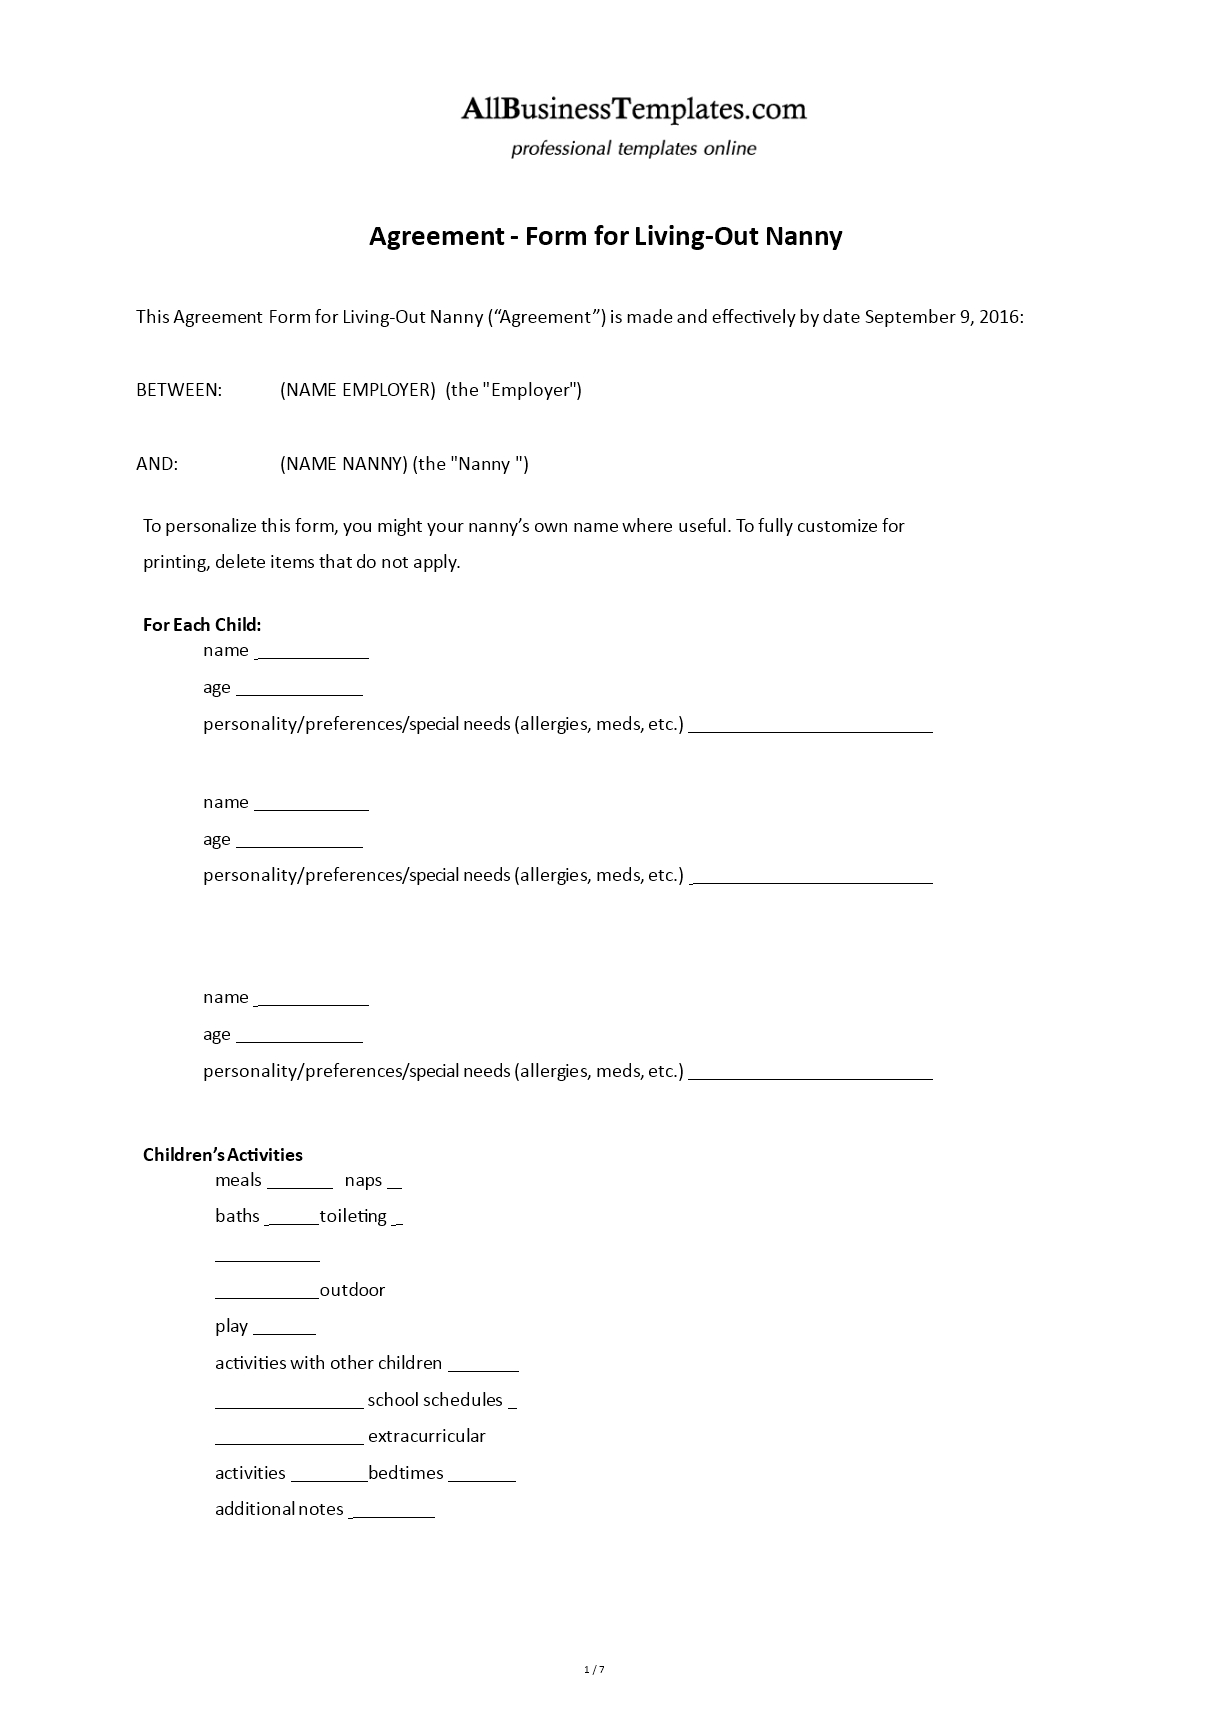 Contract Form For Living Out Nanny | Templates At Throughout Nanny Notes Template